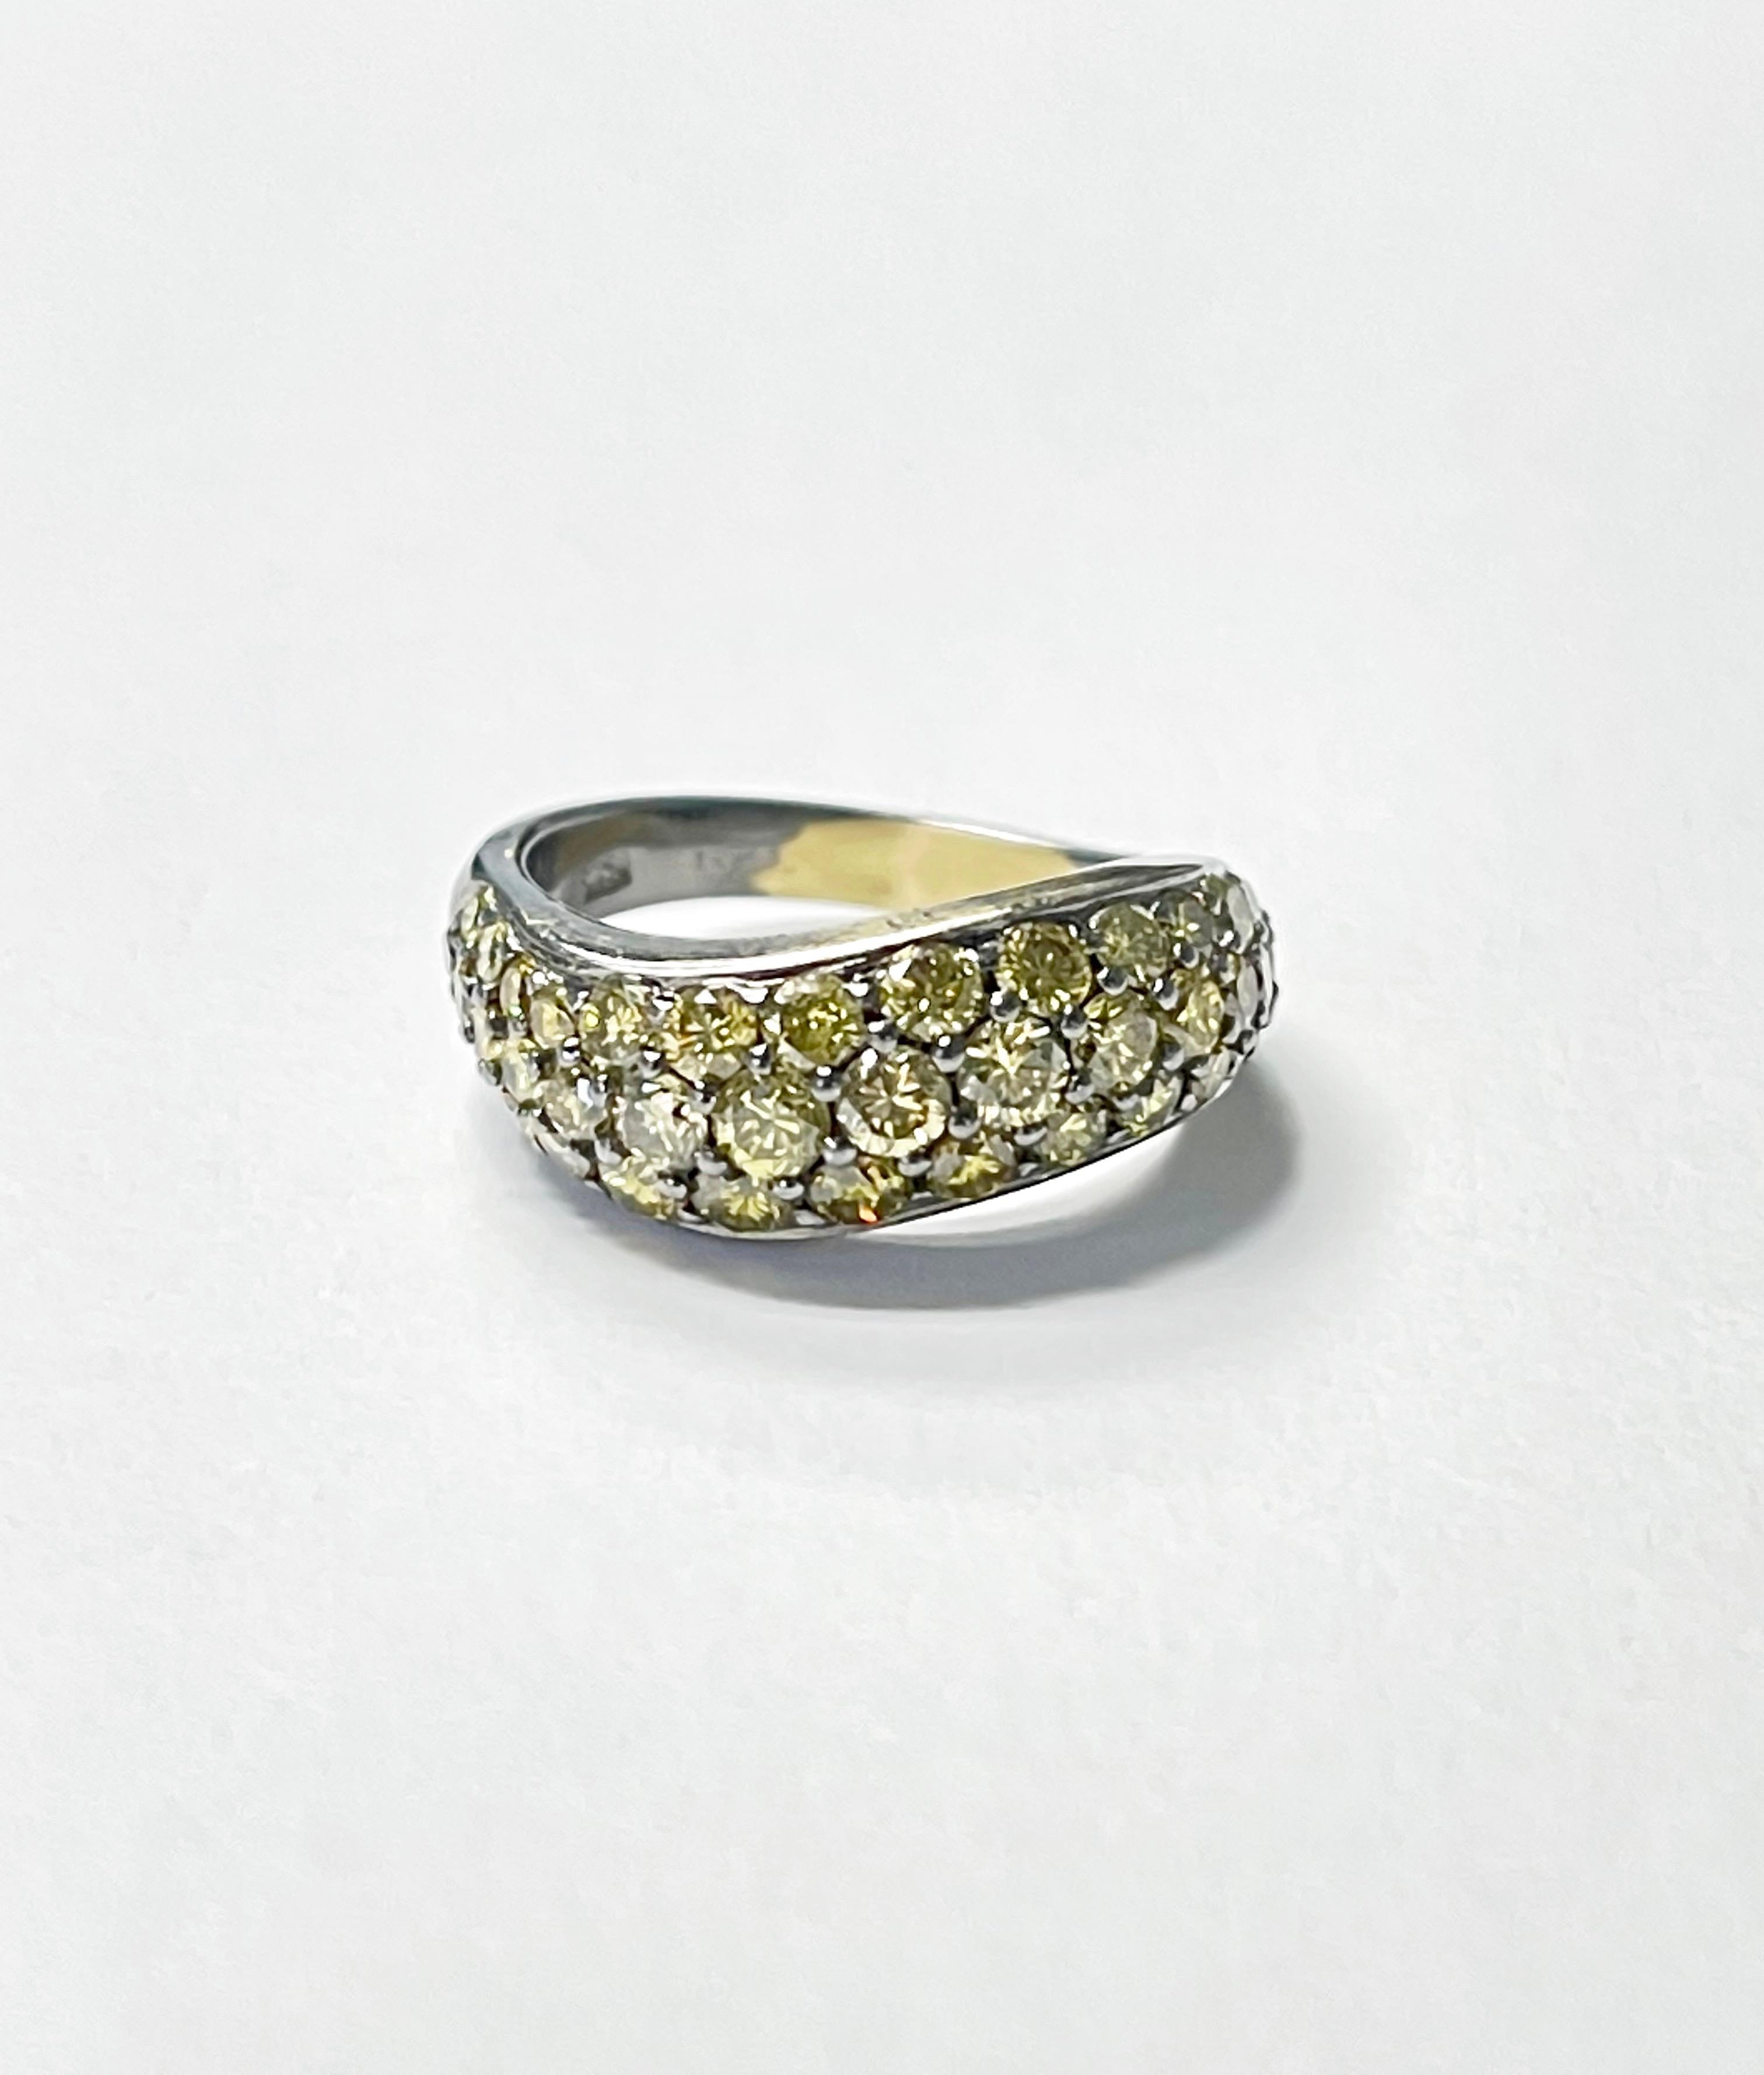 2.40 Carat Yellow Diamond Band Ring in 18K Gold In New Condition For Sale In New York, NY